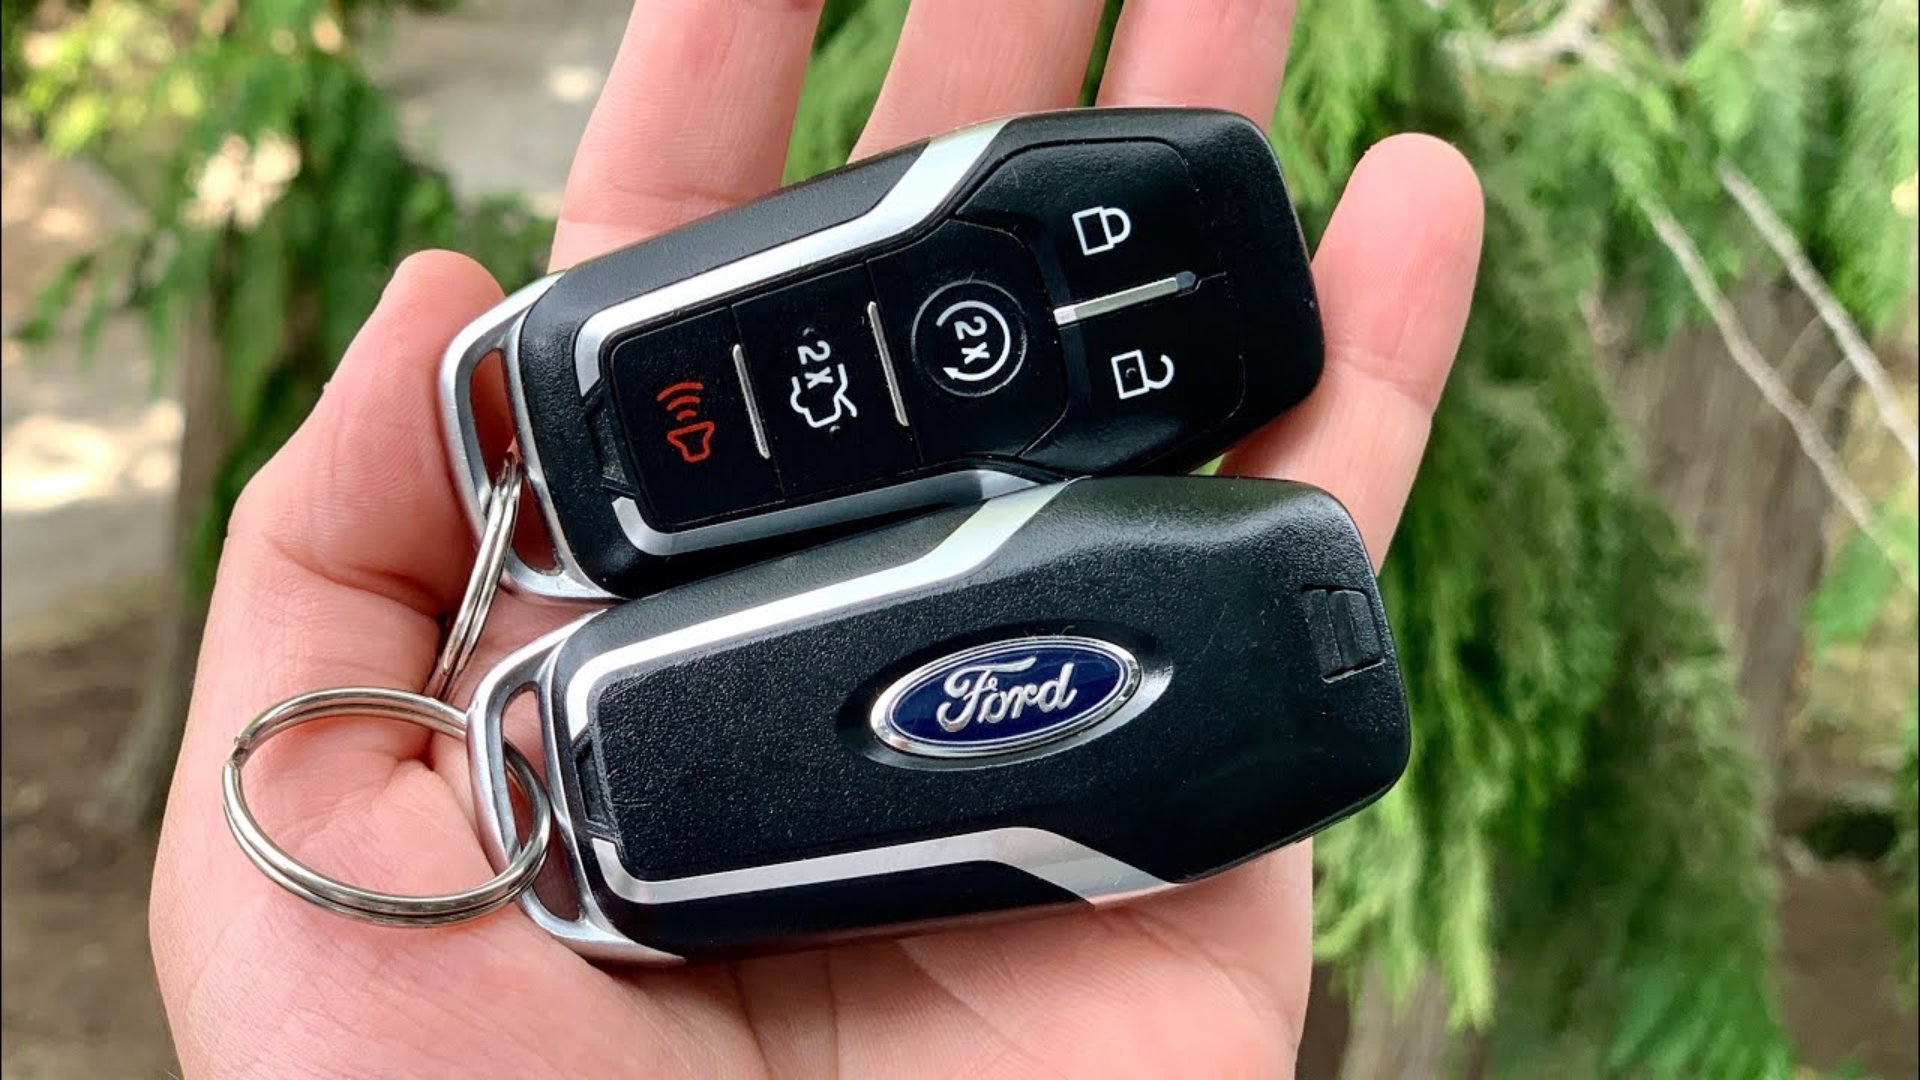 A hand holding two Ford push-to-start car keys featuring buttons for locking, unlocking, and remote starting